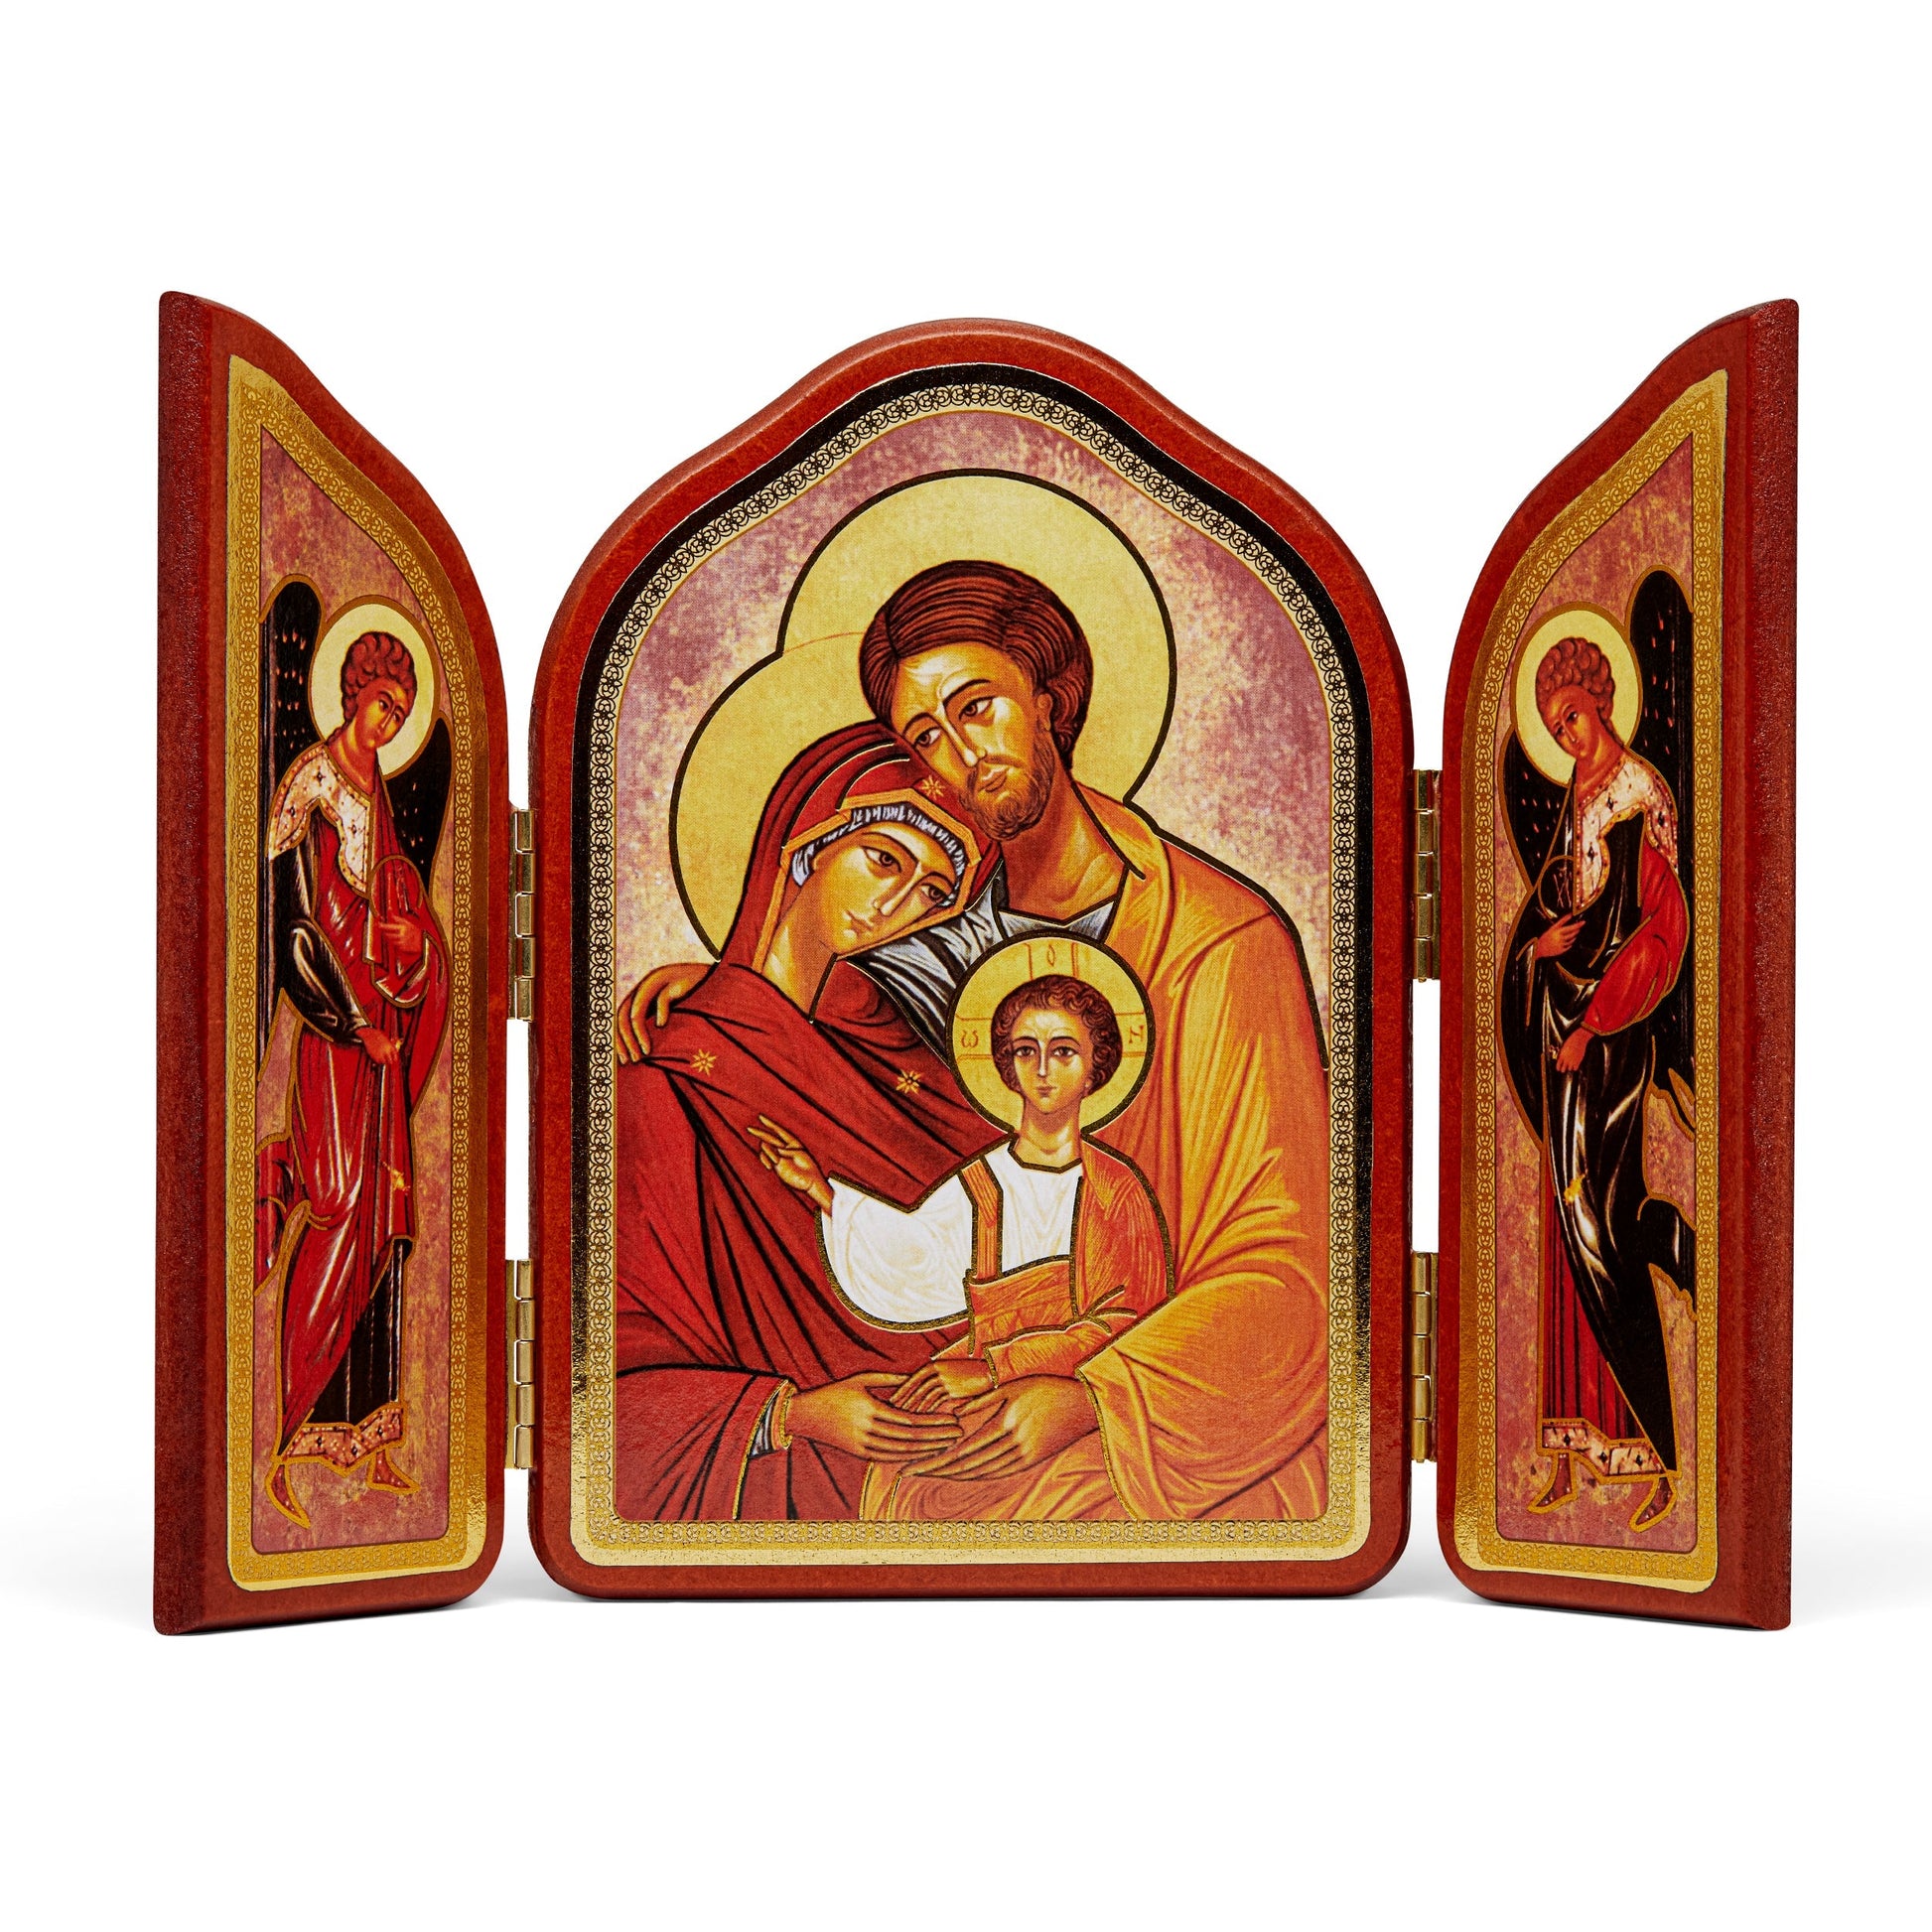 Mondo Cattolico 10.50x15 cm (4.13x5.91 in) Triptych in Red Wood of the Holy Family